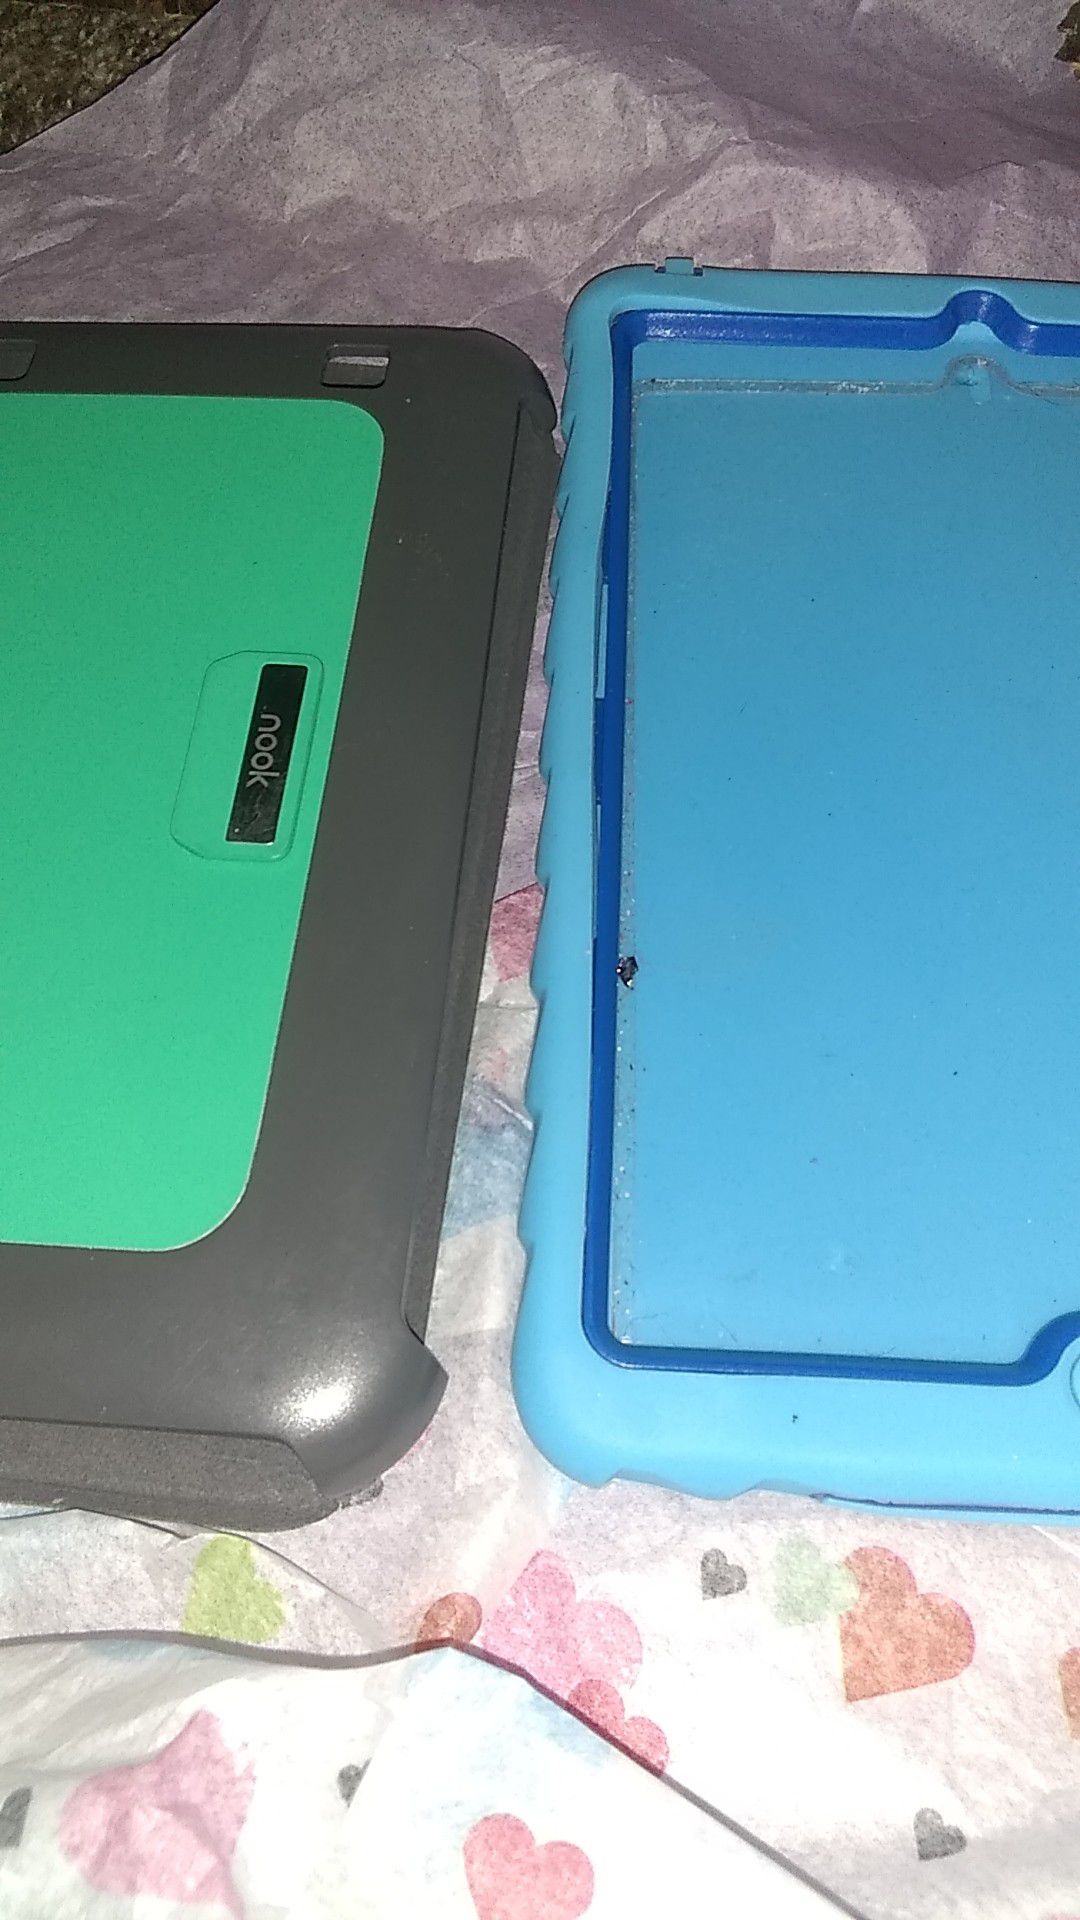 Tablet covers never used